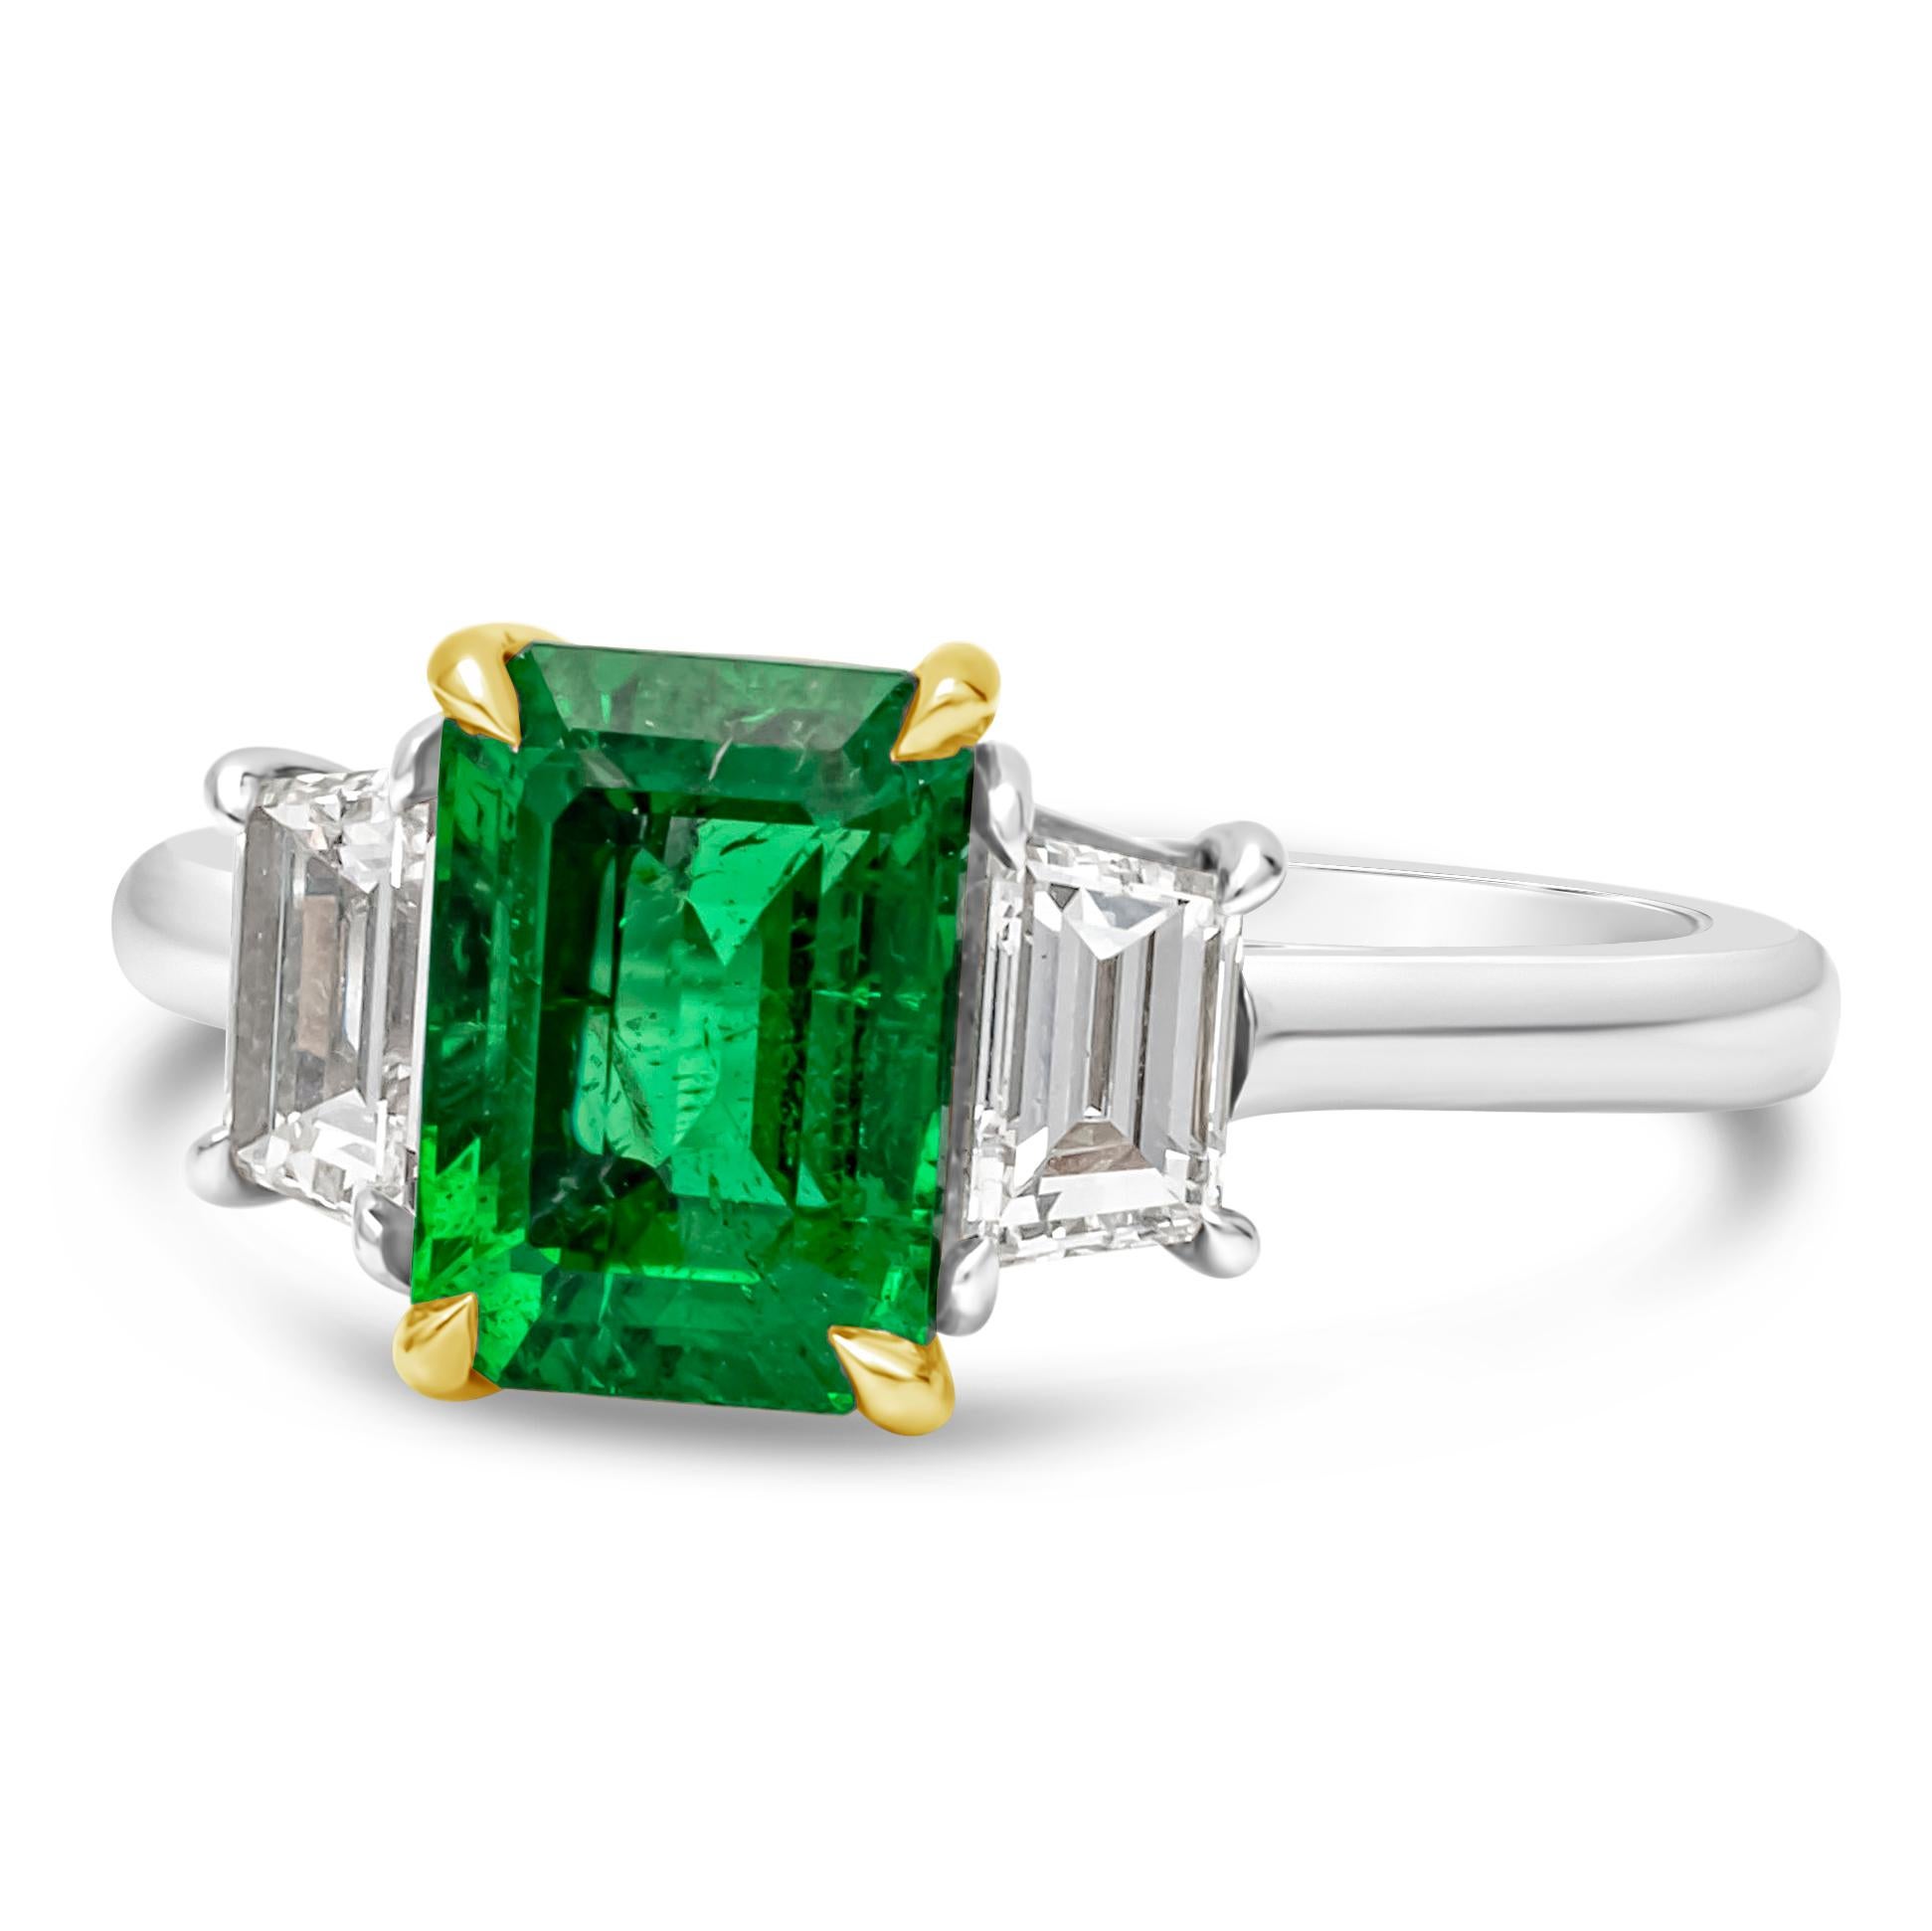 This stunning and elegant engagement ring showcasing a AGL certified color-rich emerald cut green emerald center stone weighing 2.14 carats, VS in clarity and set in a classic four prong basket setting. Flanked by two brilliant trapezoid diamonds on